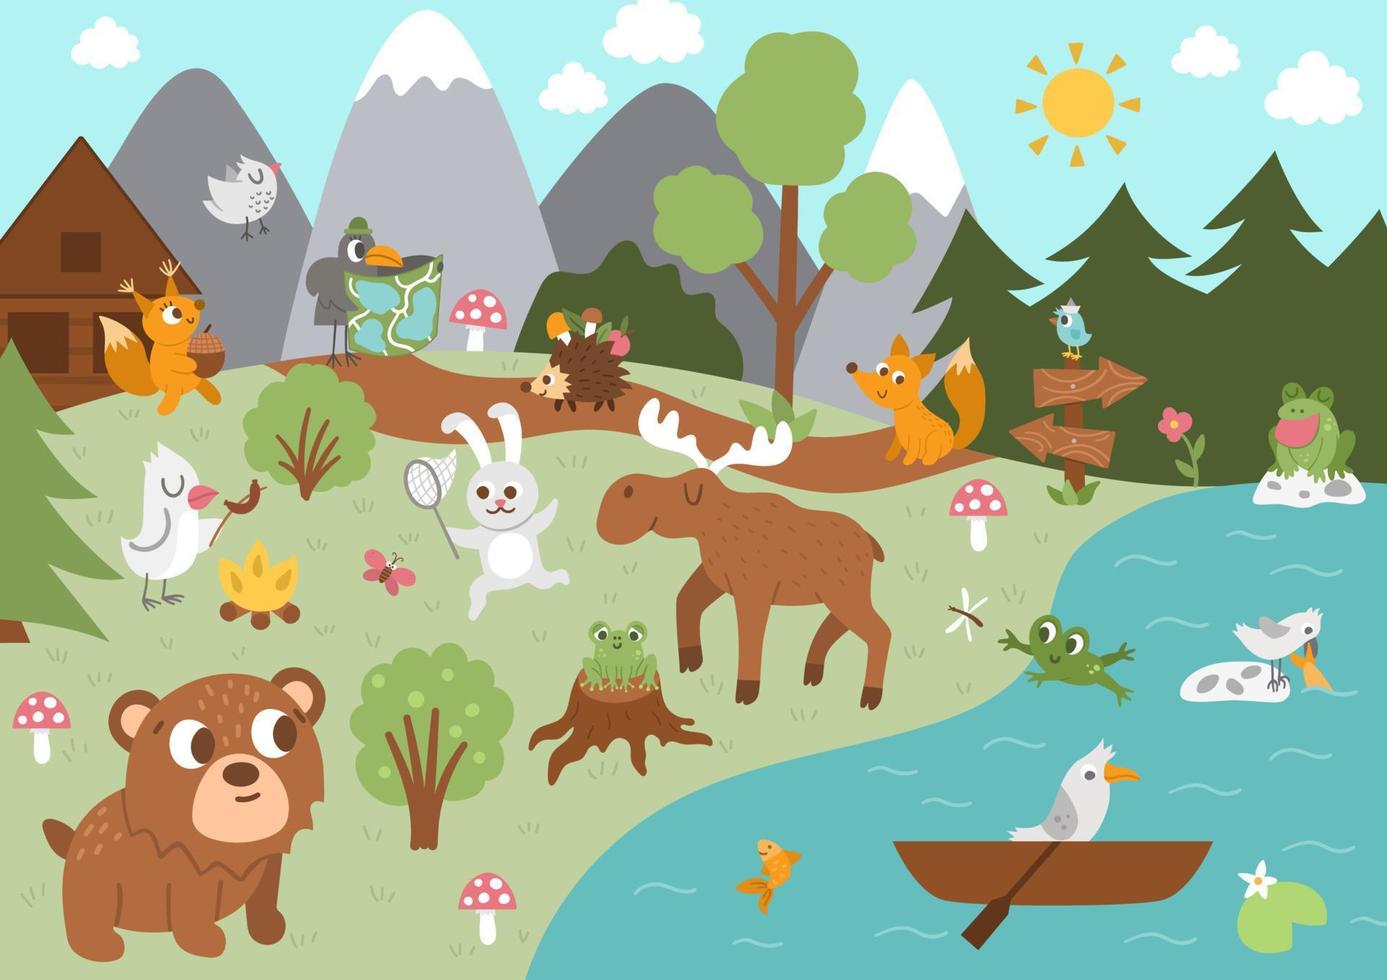 Summer camp background with cute forest animals. Vector woodland scene with rabbit, birds, moose, trees, mountains, river. Active holidays or local tourism plan design for postcards, ads, print